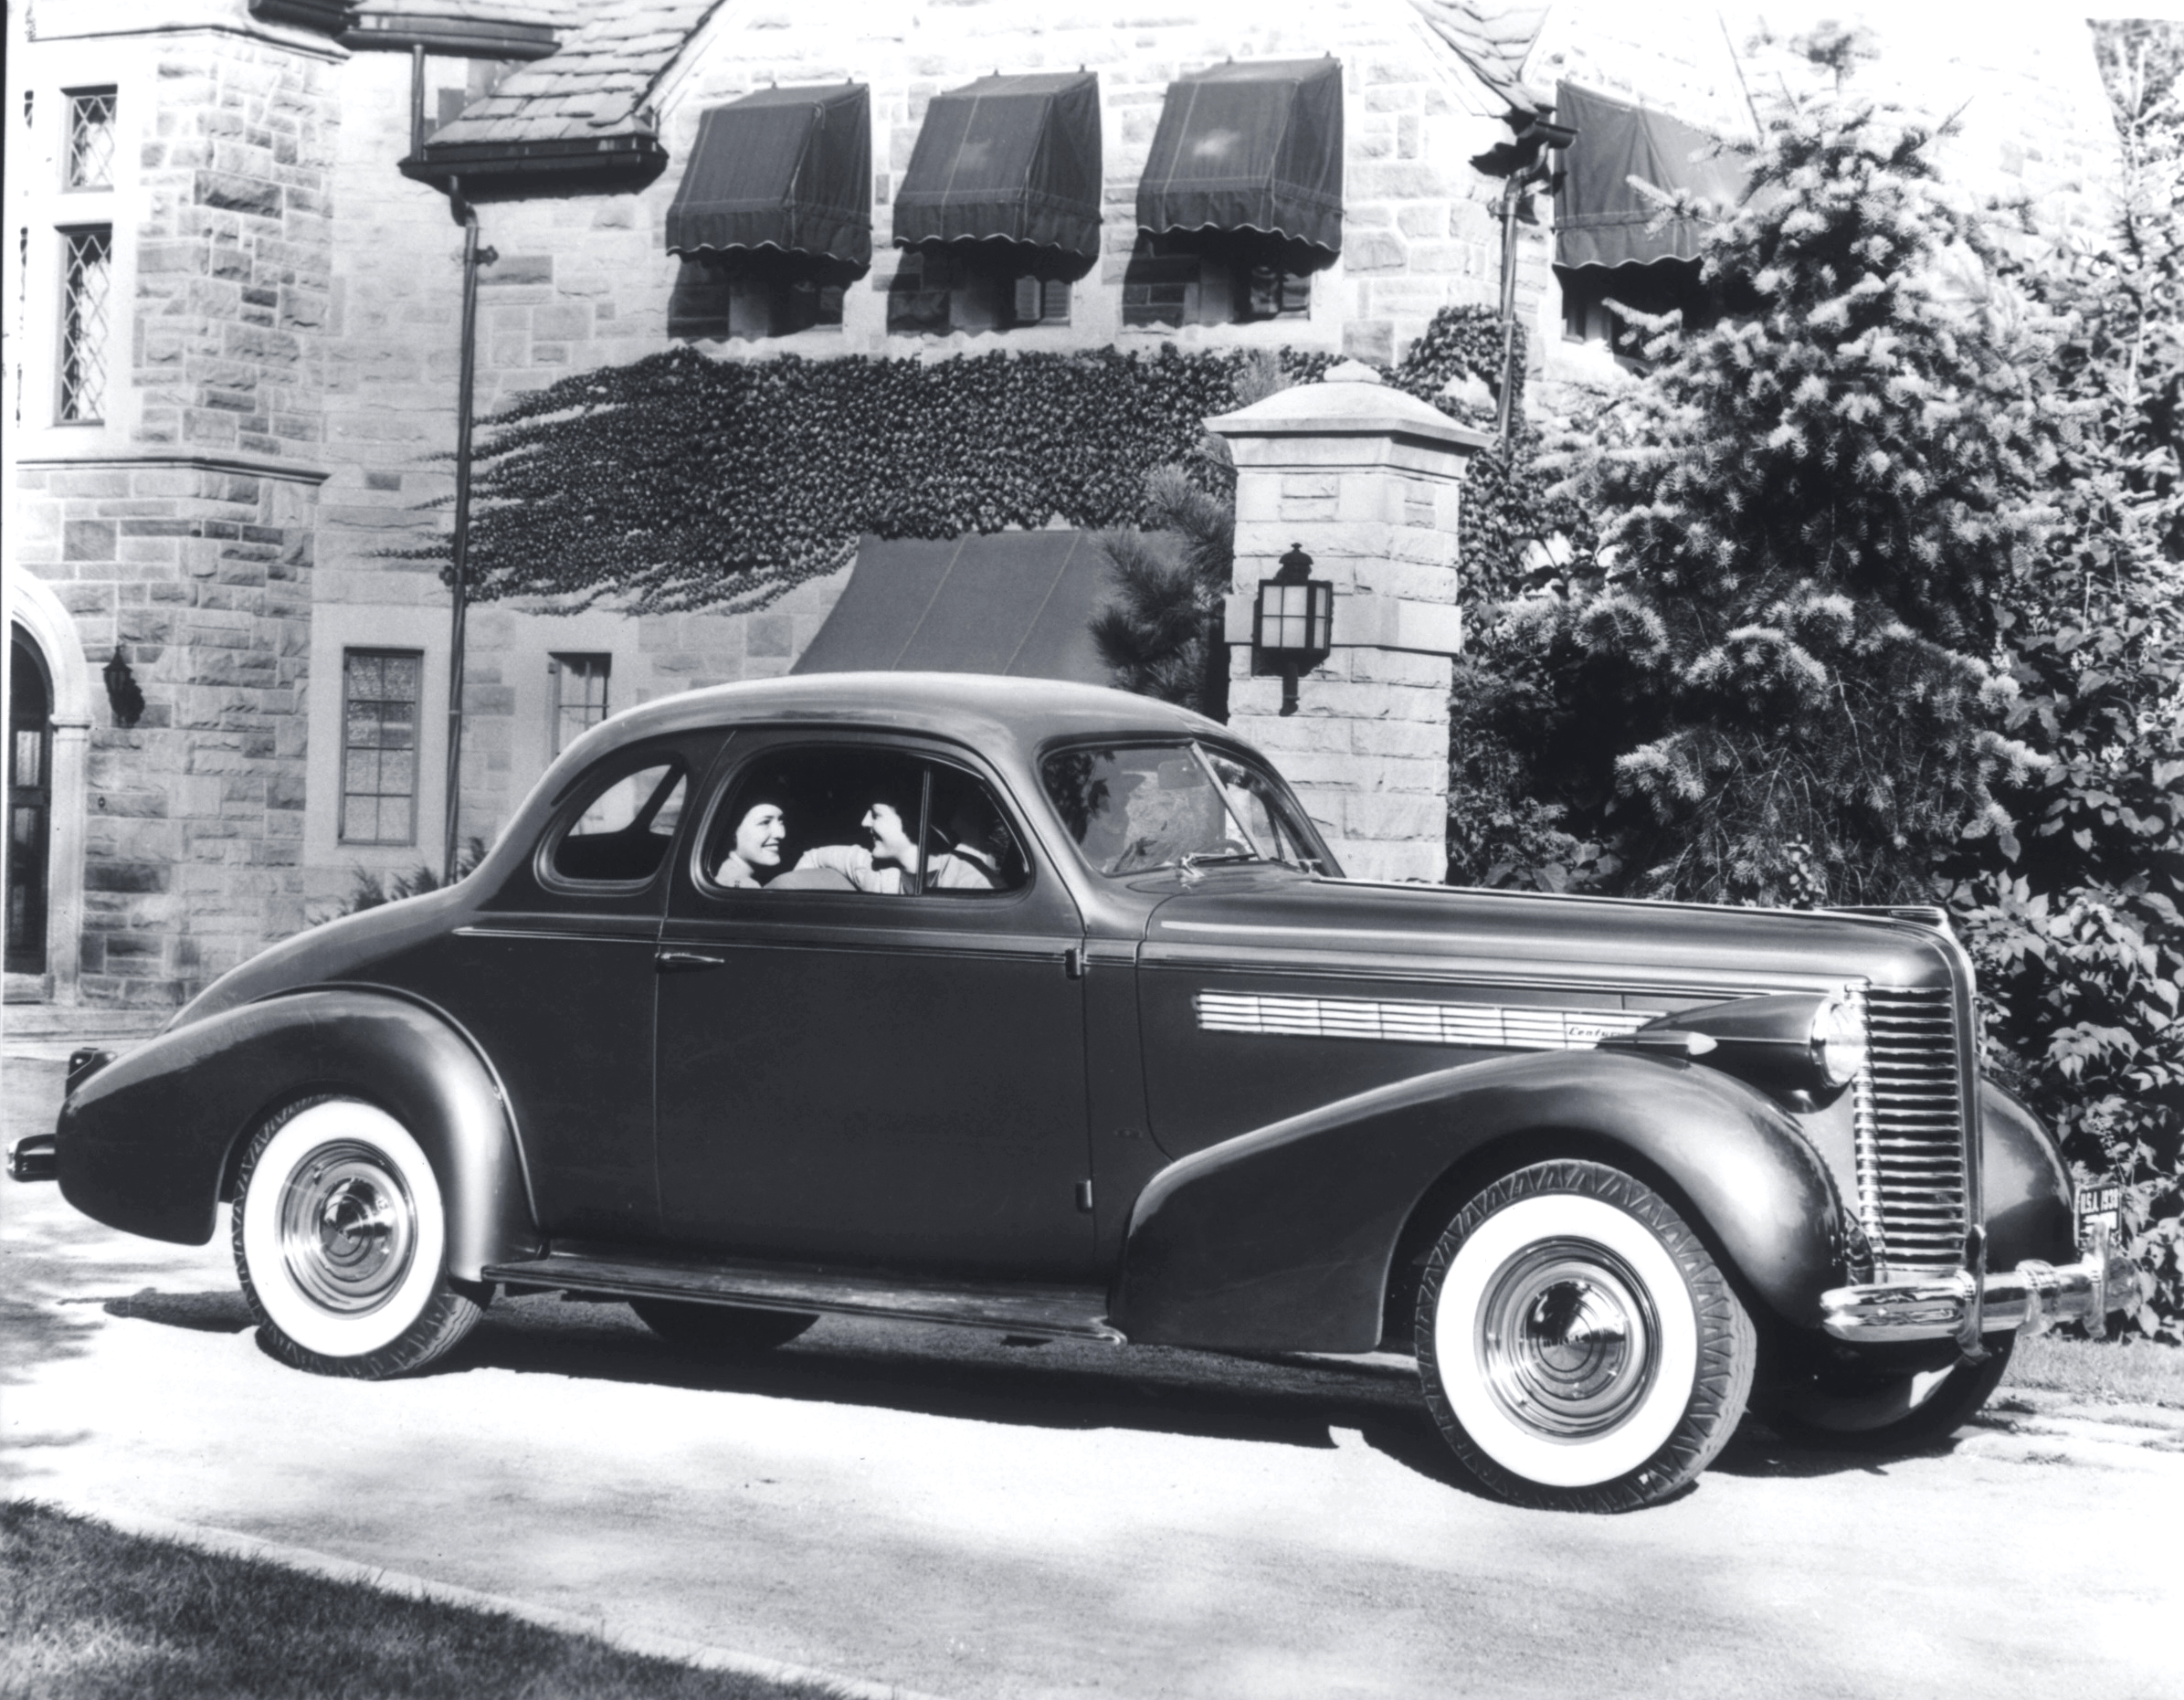 The “Dynaflash 8” engine in the 1938 Buick Century enabled it to push past the “century” mark, topping out at 103 mph.